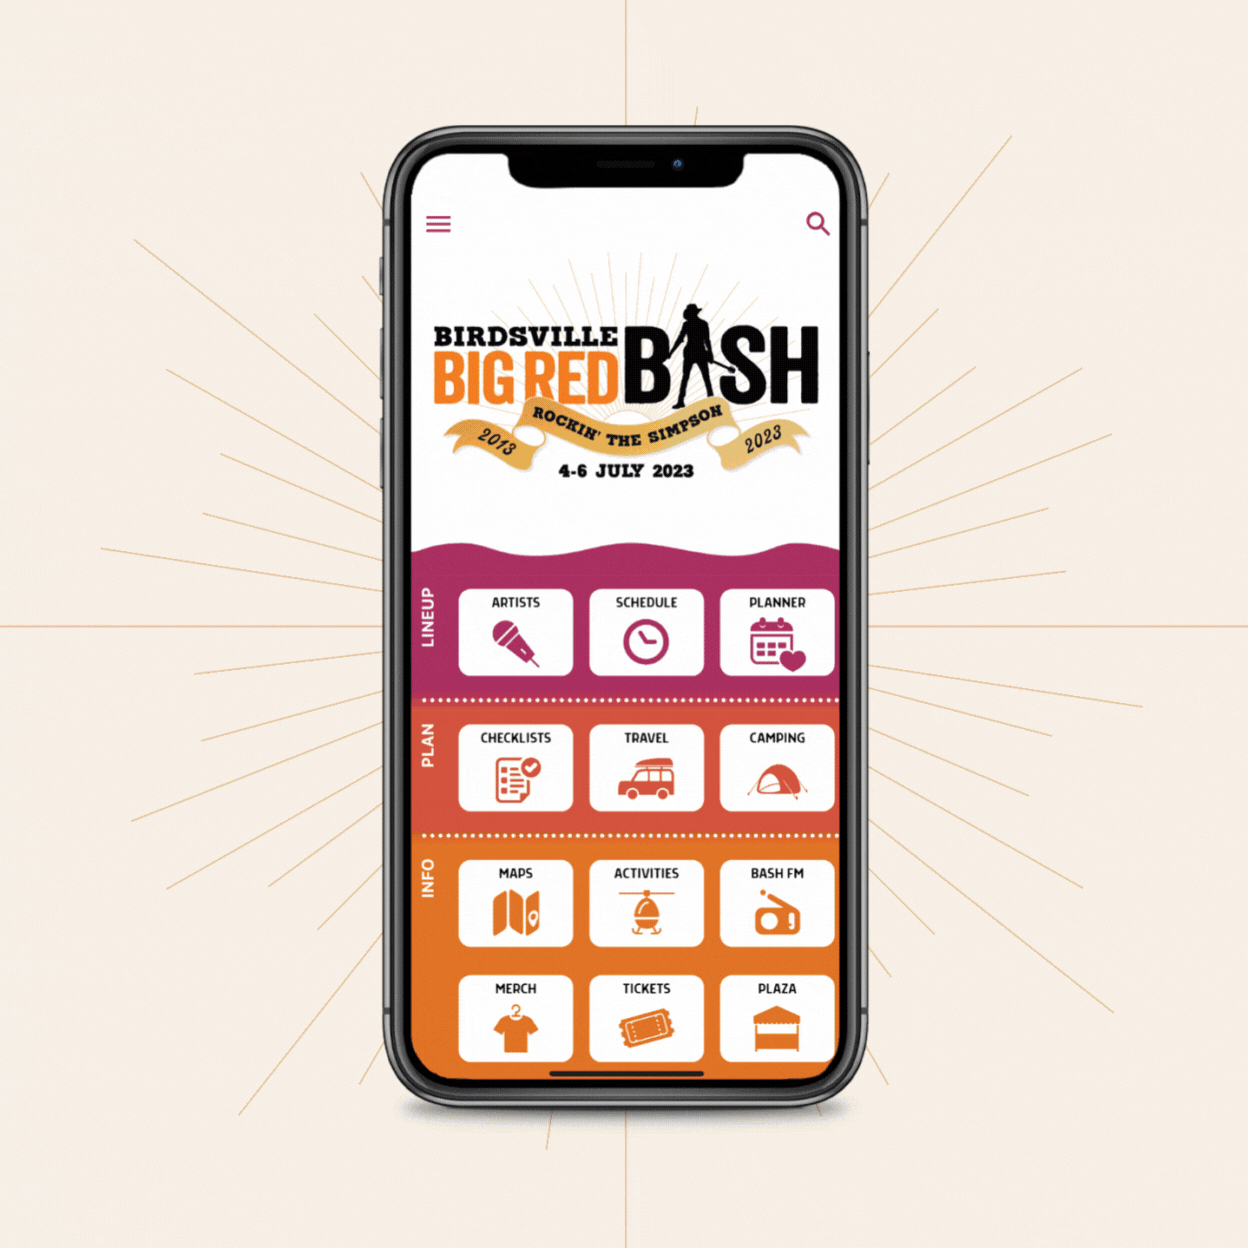 The 2023 Bash App is here! Big Red Bash